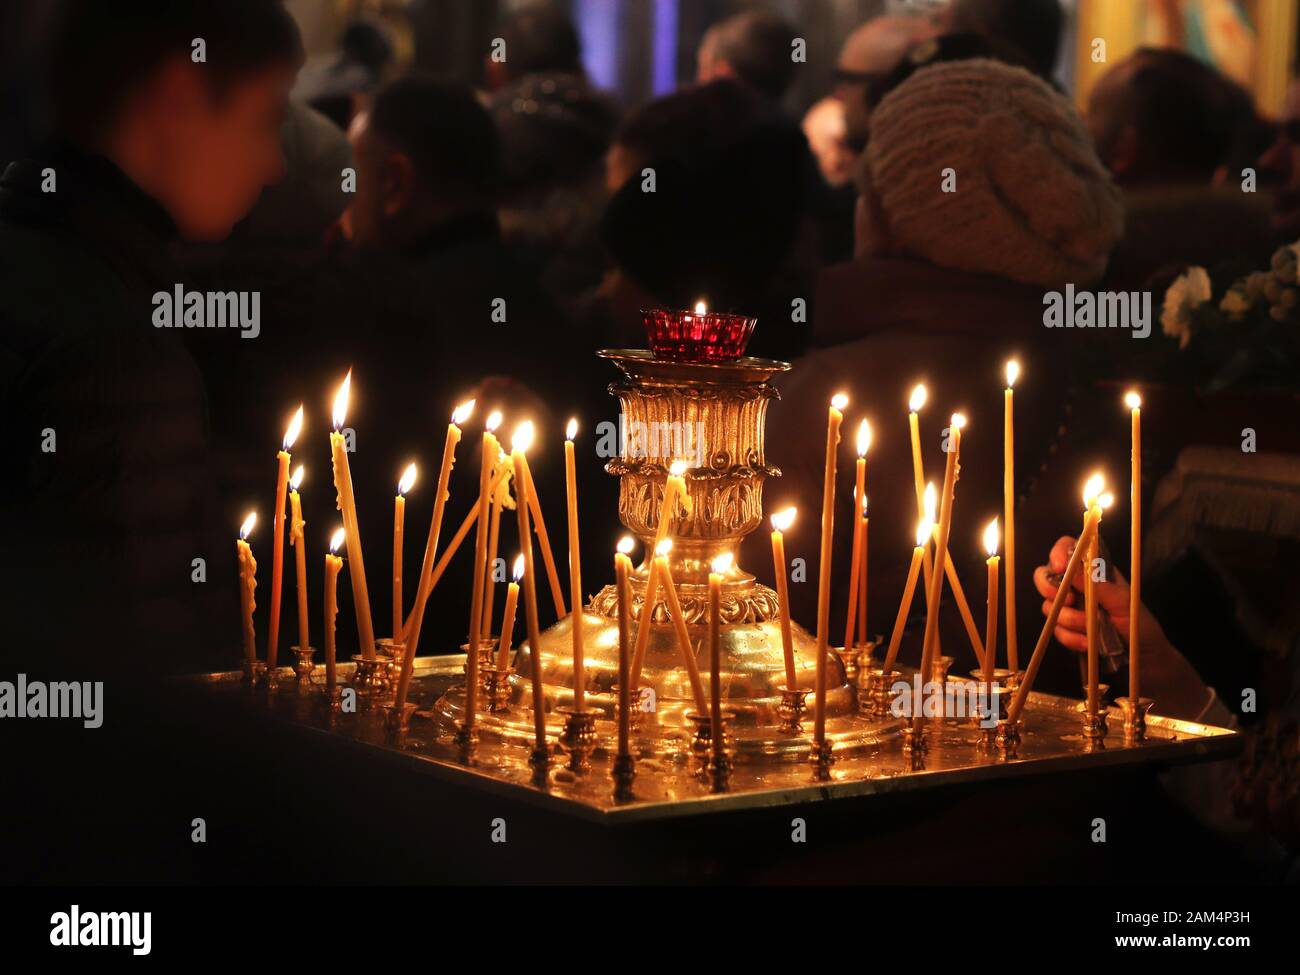 nocturnal christmas service in a russian orthodox church, close-up of burning candles Stock Photo